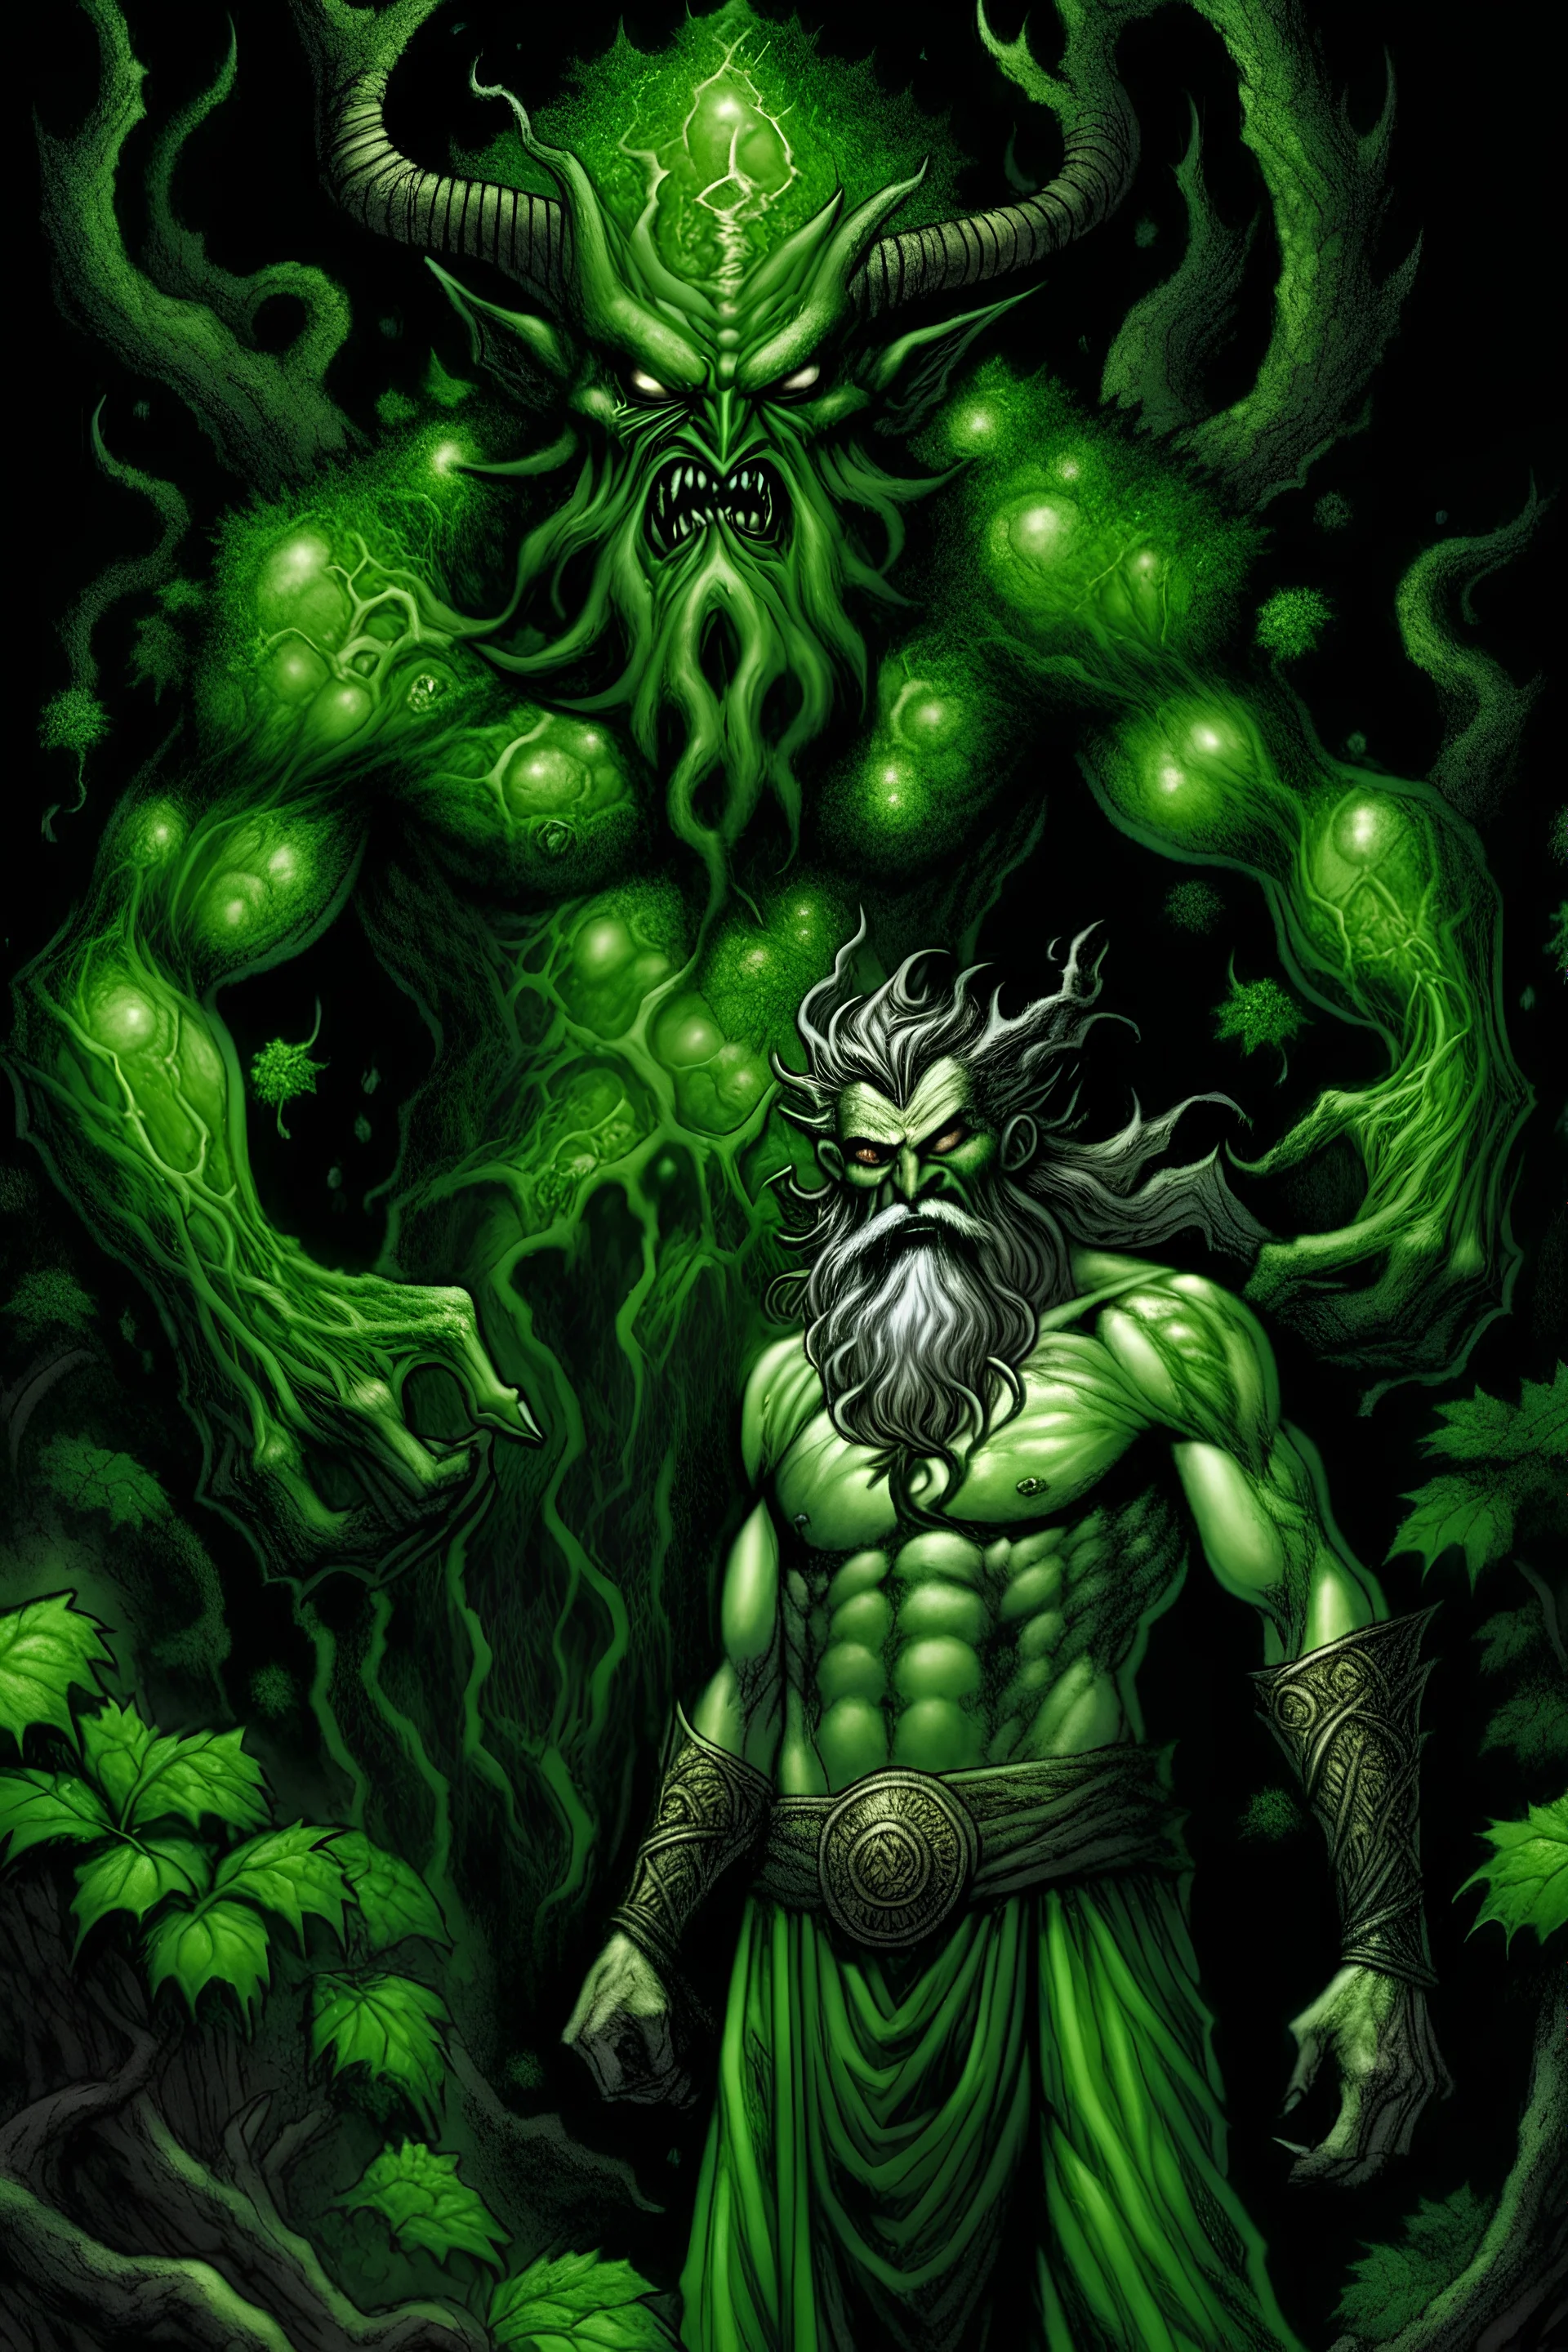 Tartarus and the Green Man